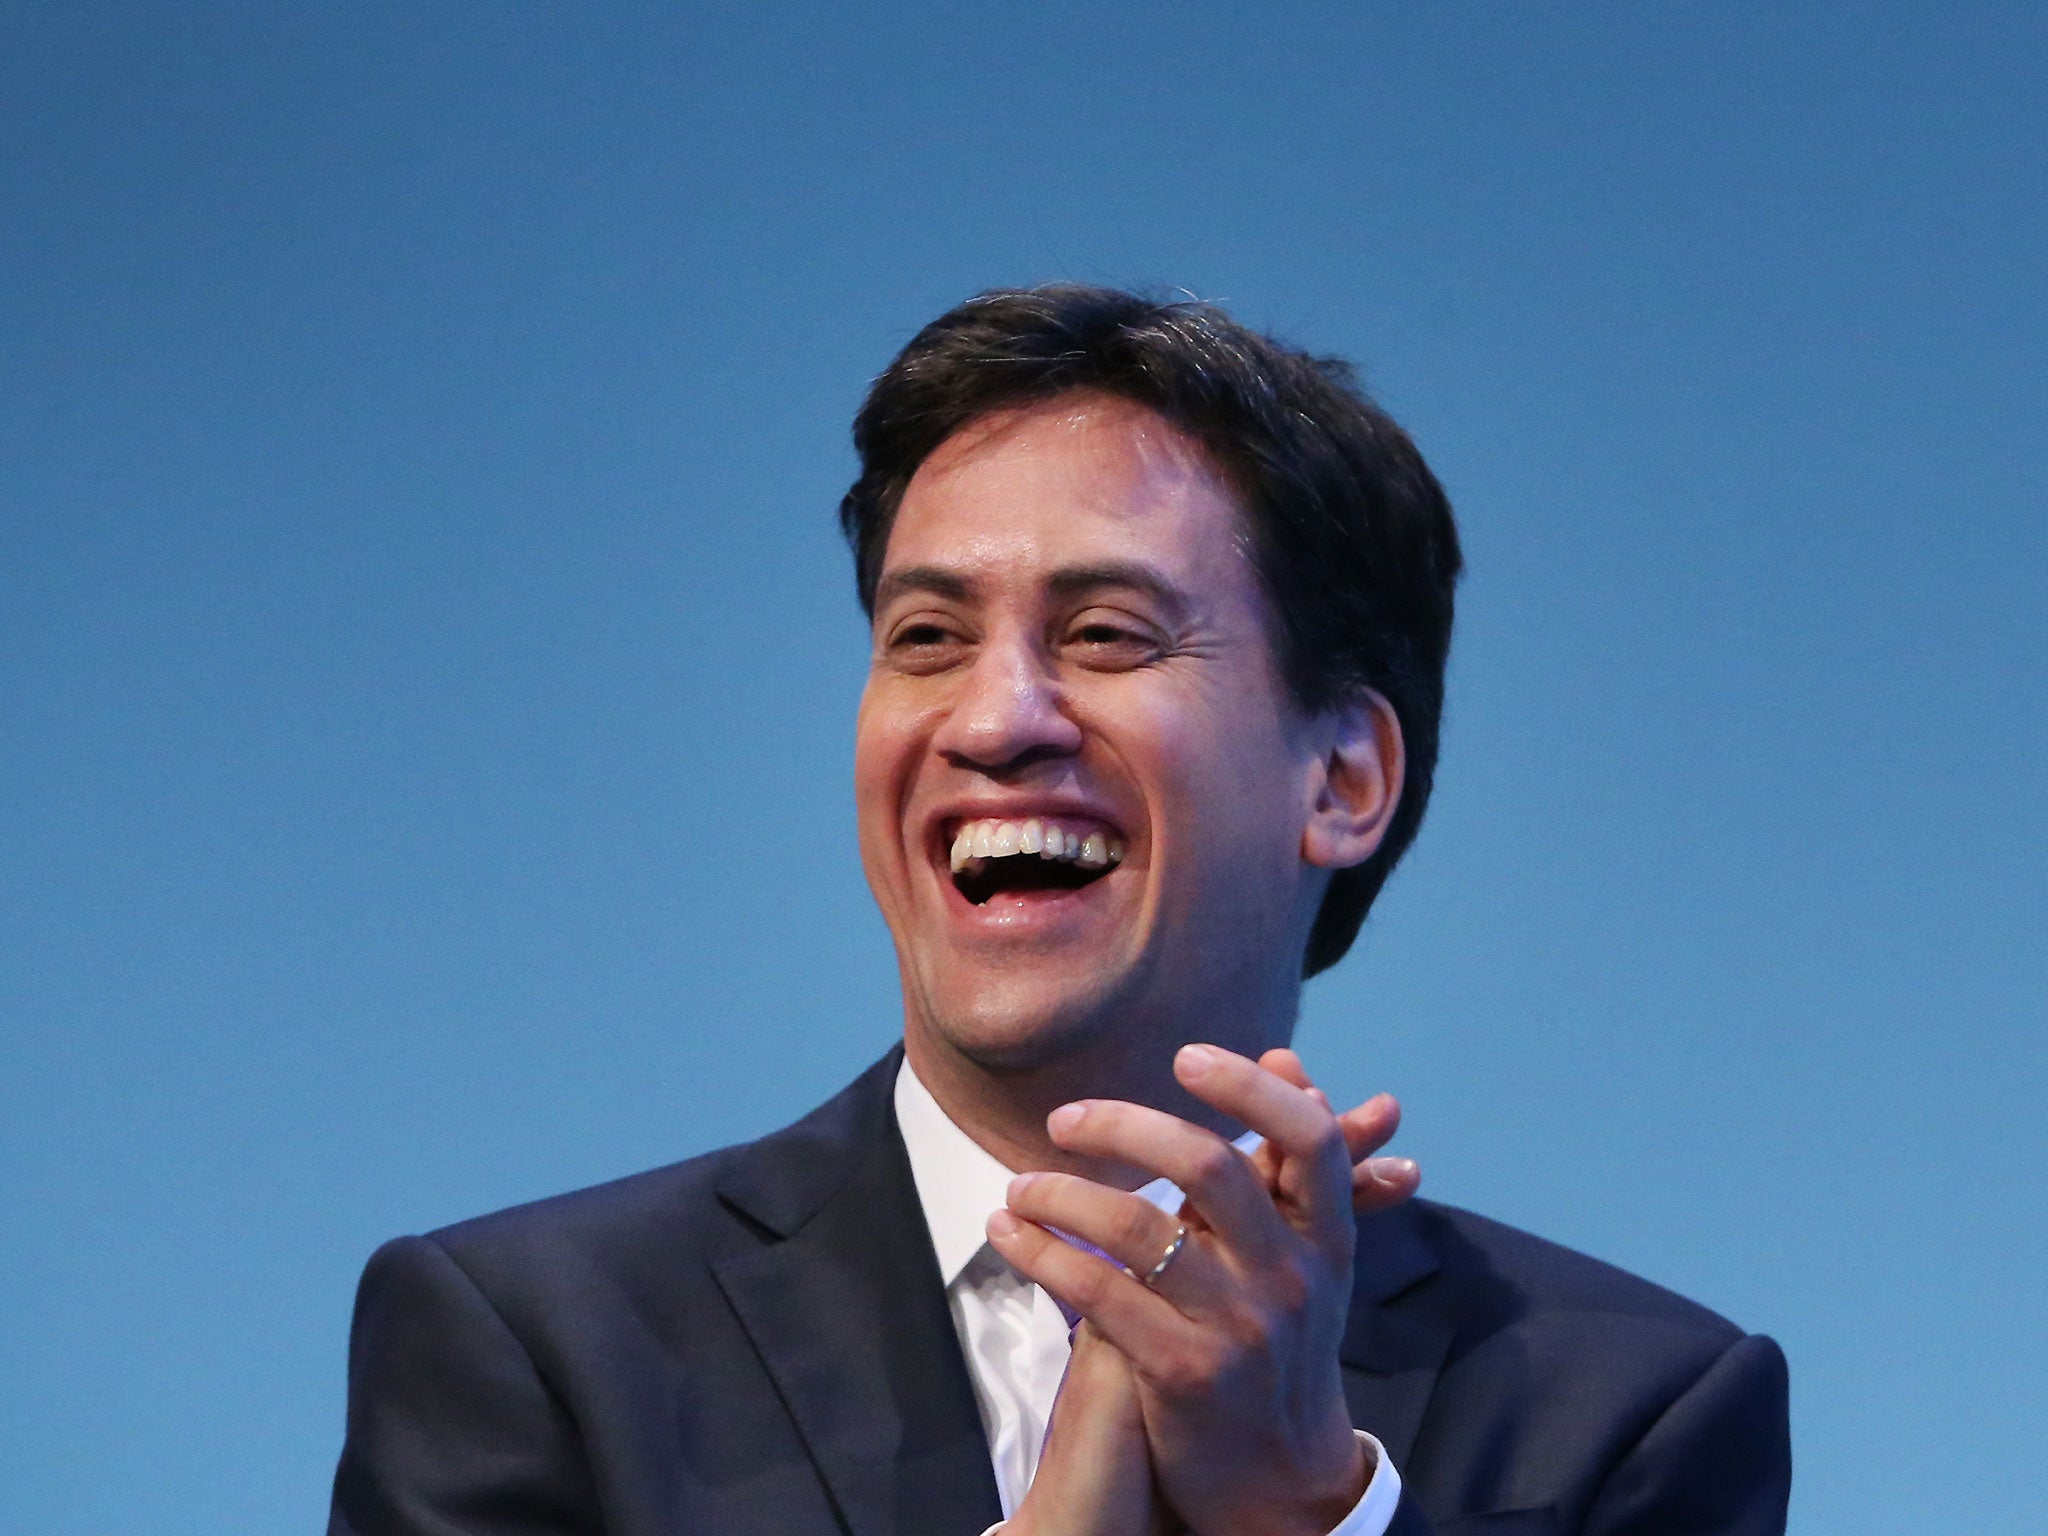 Ed Miliband’s pledge to freeze gas and electricity prices is overwhelmingly backed by the public